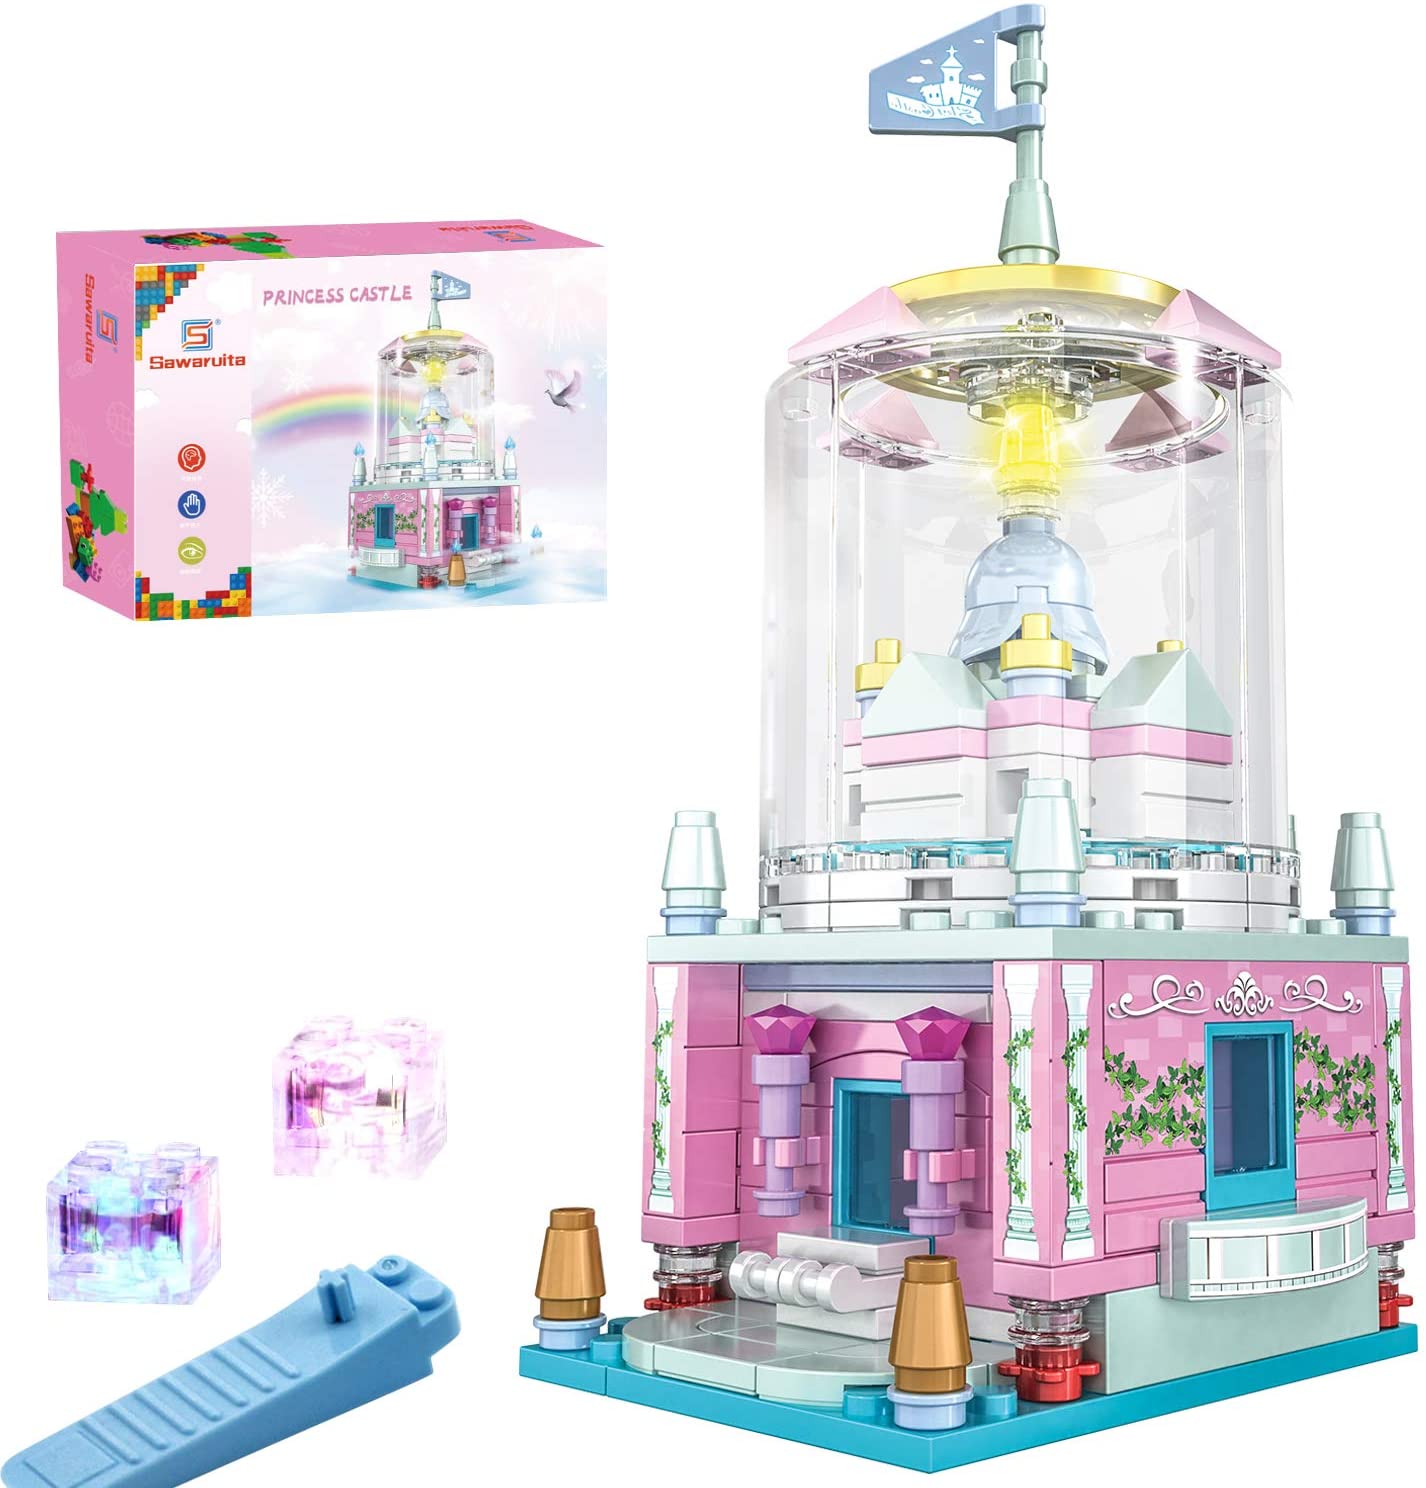 HOMOFY Building Blocks Toys for Girls Age 8-12 Princess Castle Sets for Girls Age 6-12 Construction Building Bricks Girls Toys Ages 9-12 STEM Blocks for Kids Age 6 7 12-15 Girls Birthday Gifts 278pcs 